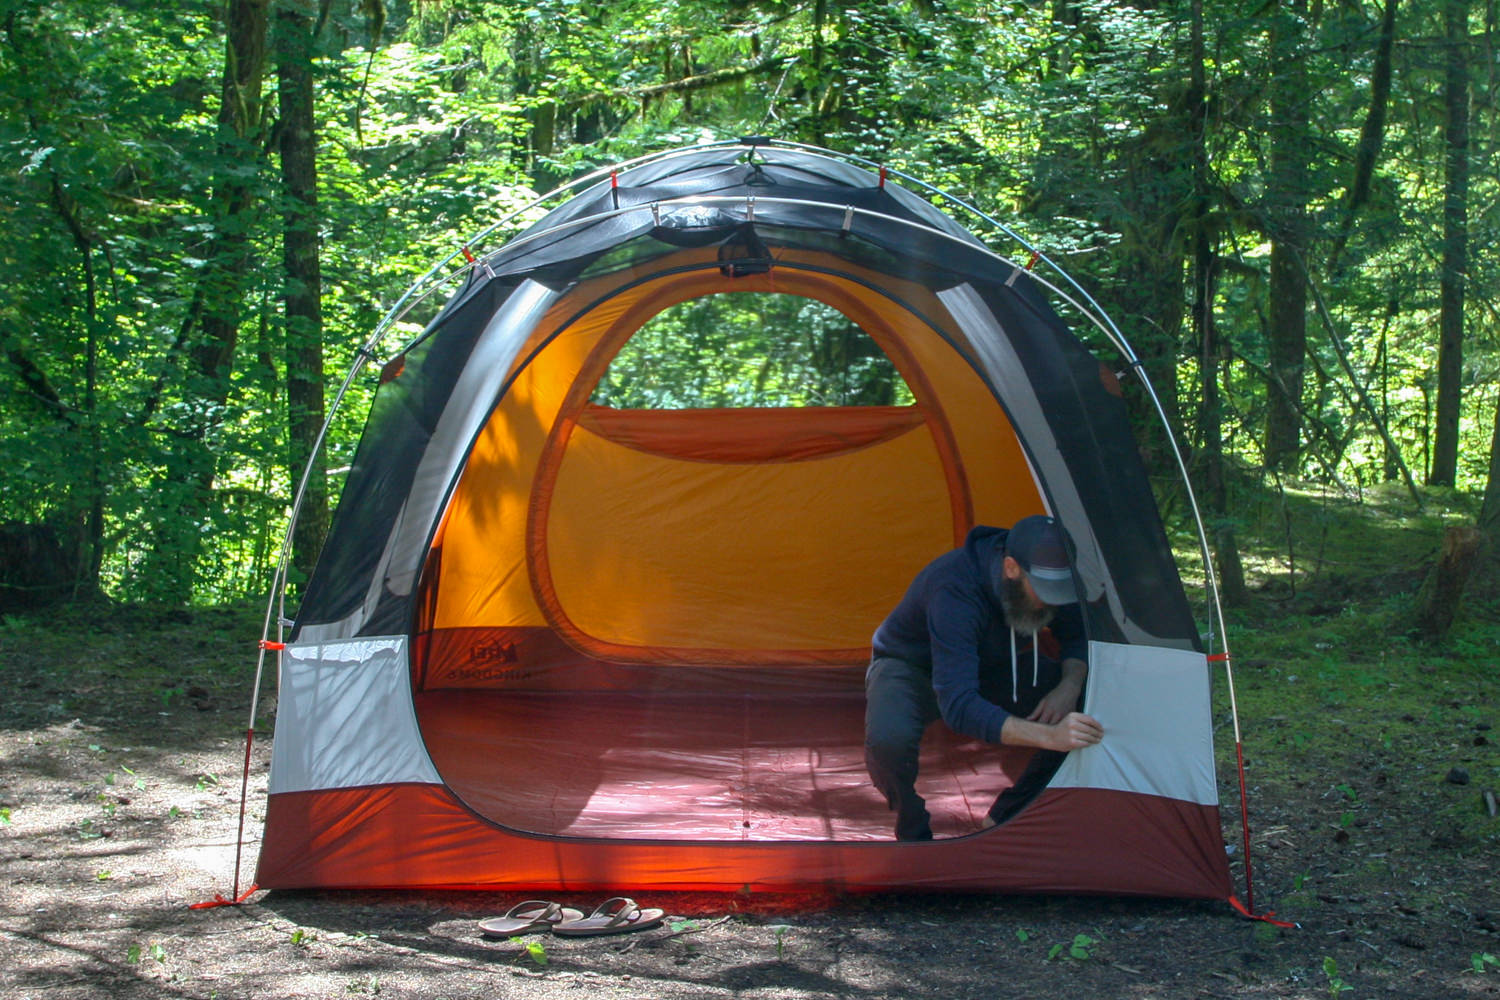 Camping Tent Market Size 2022, Industry Trends, Growth Rate, Research Report By 2027